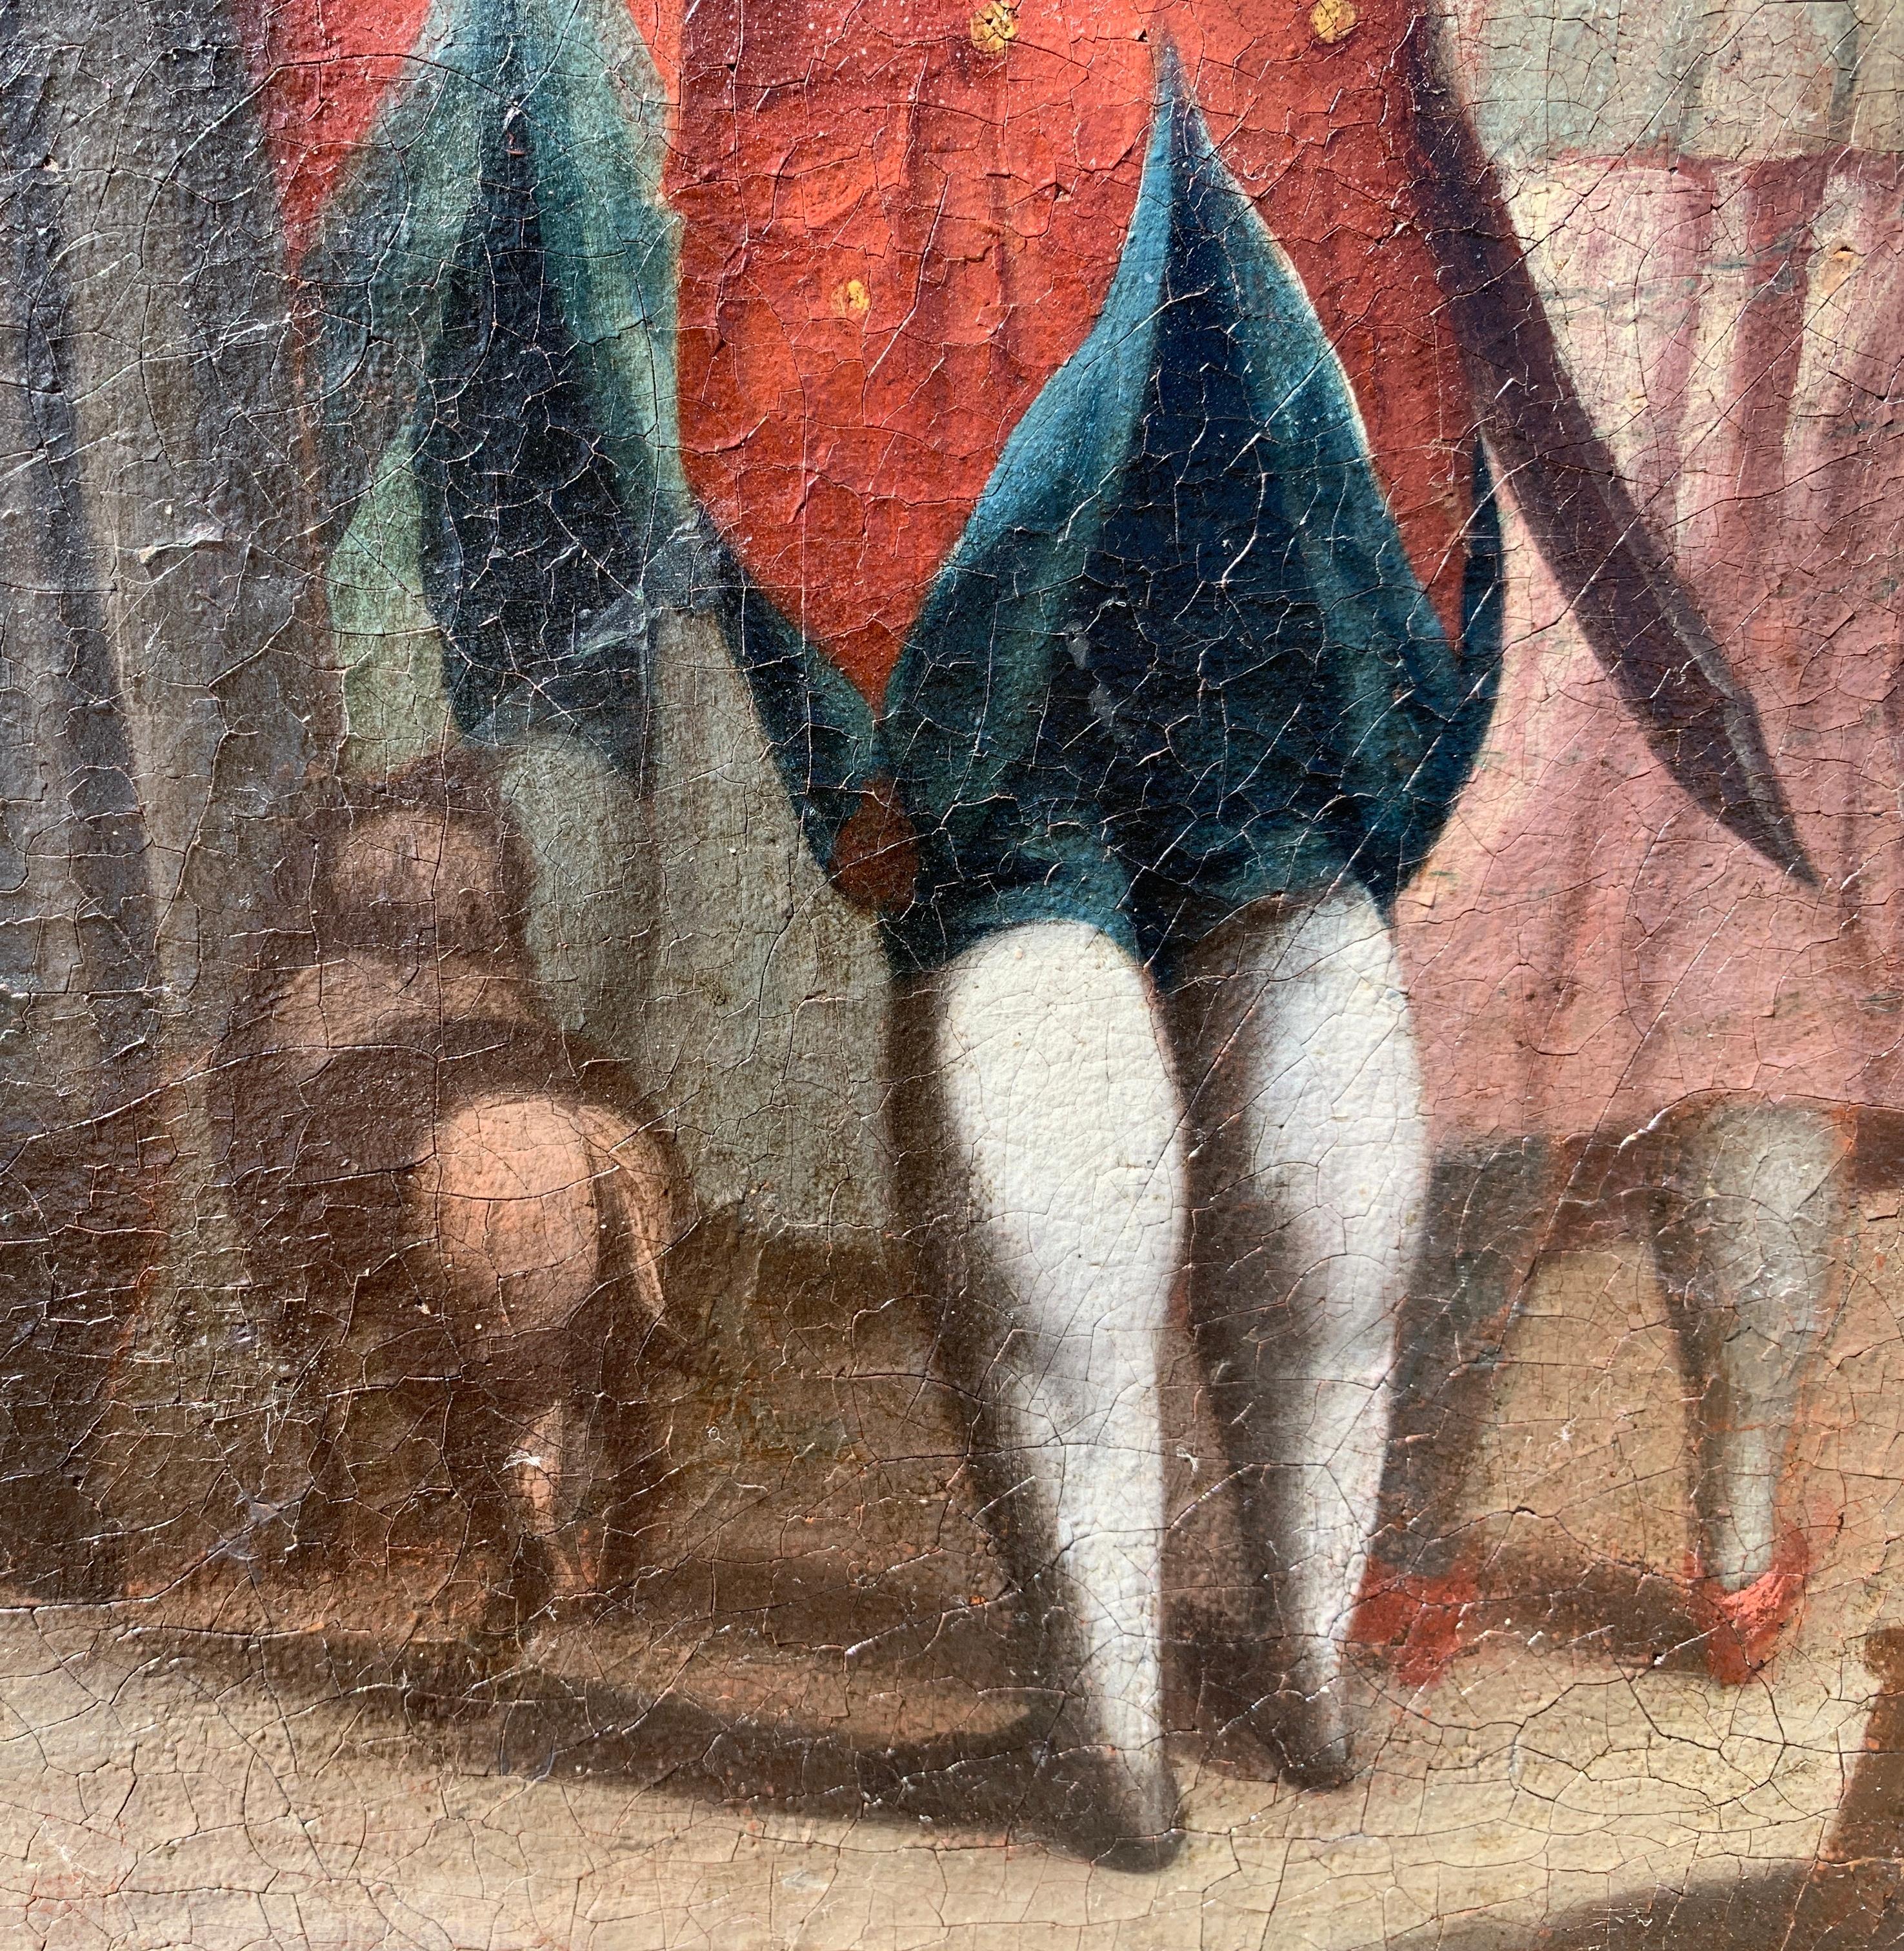 Carnival painter (Italian school)- 18th century figure painting - Street show For Sale 8